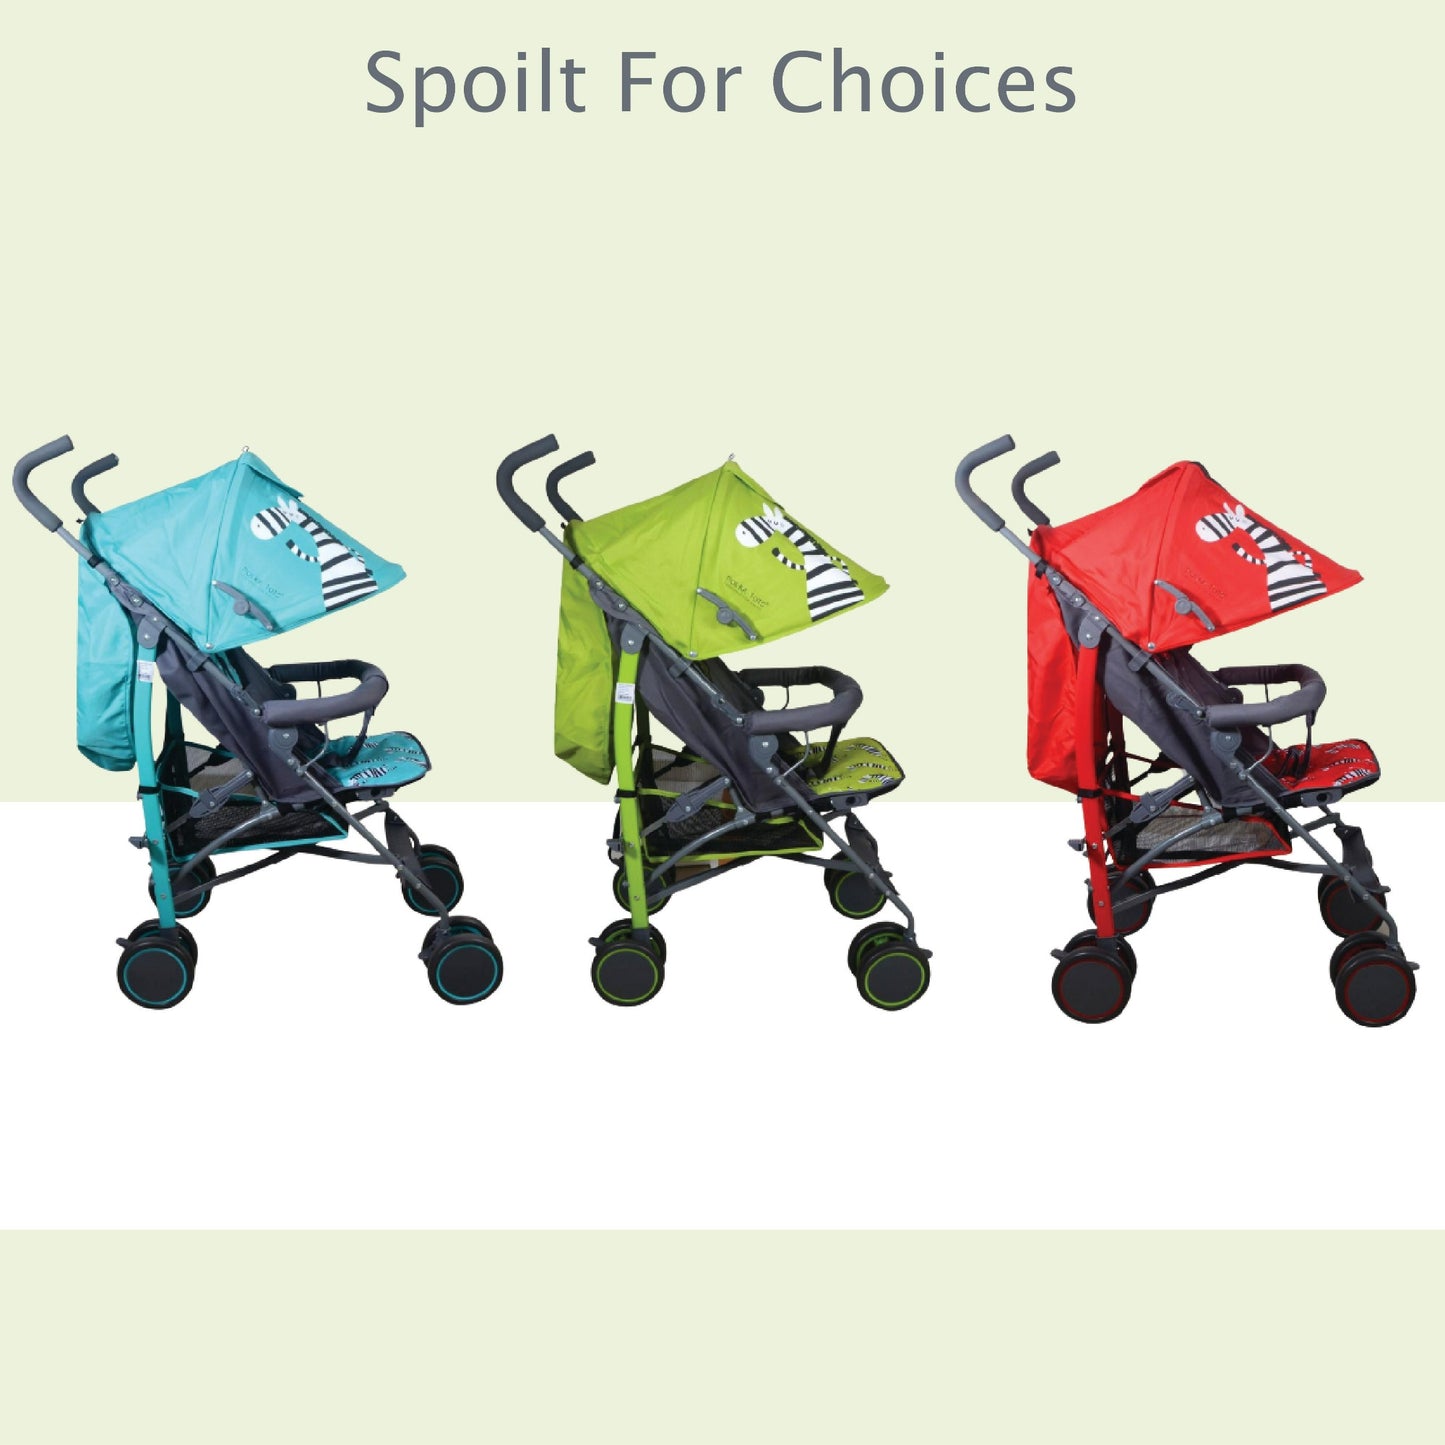 Available Colors of  Umbrella Strollers